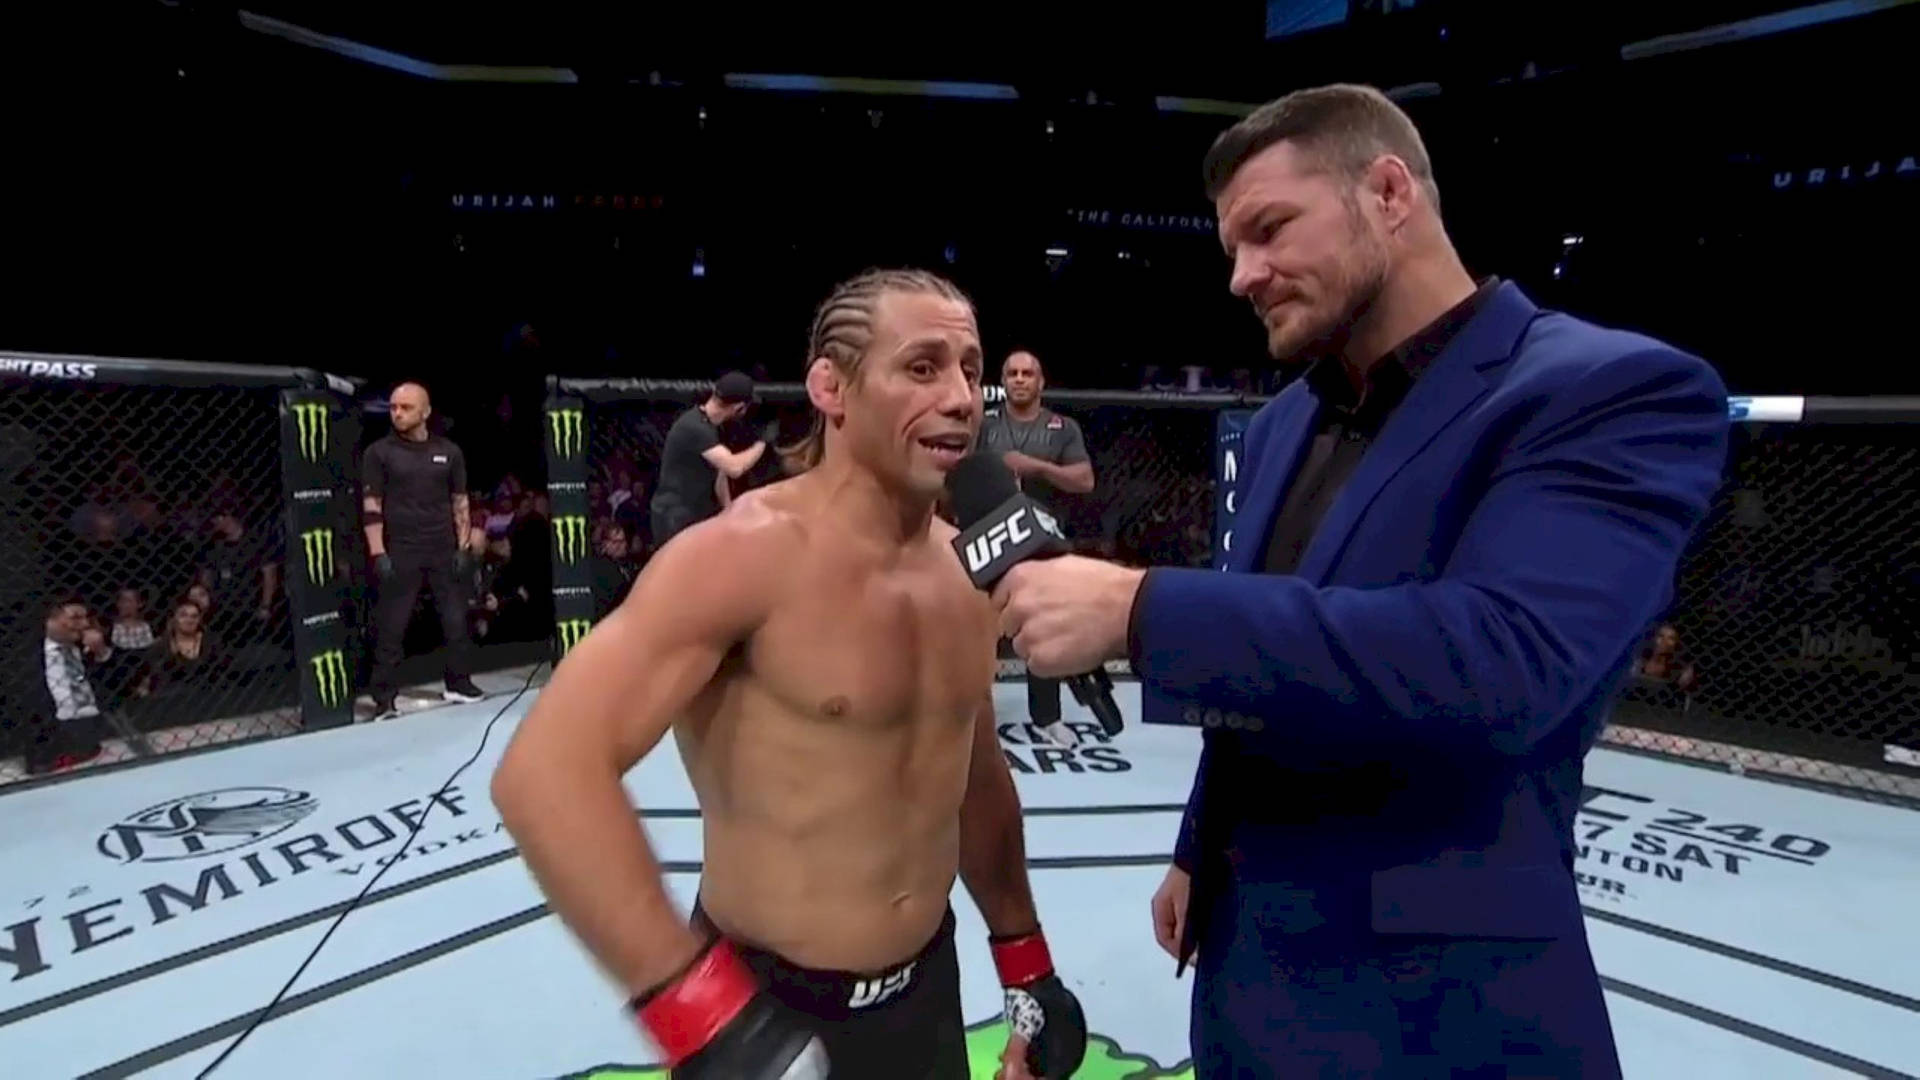 Urijah Faber - A Candid Interview Inside The Ring Wallpaper